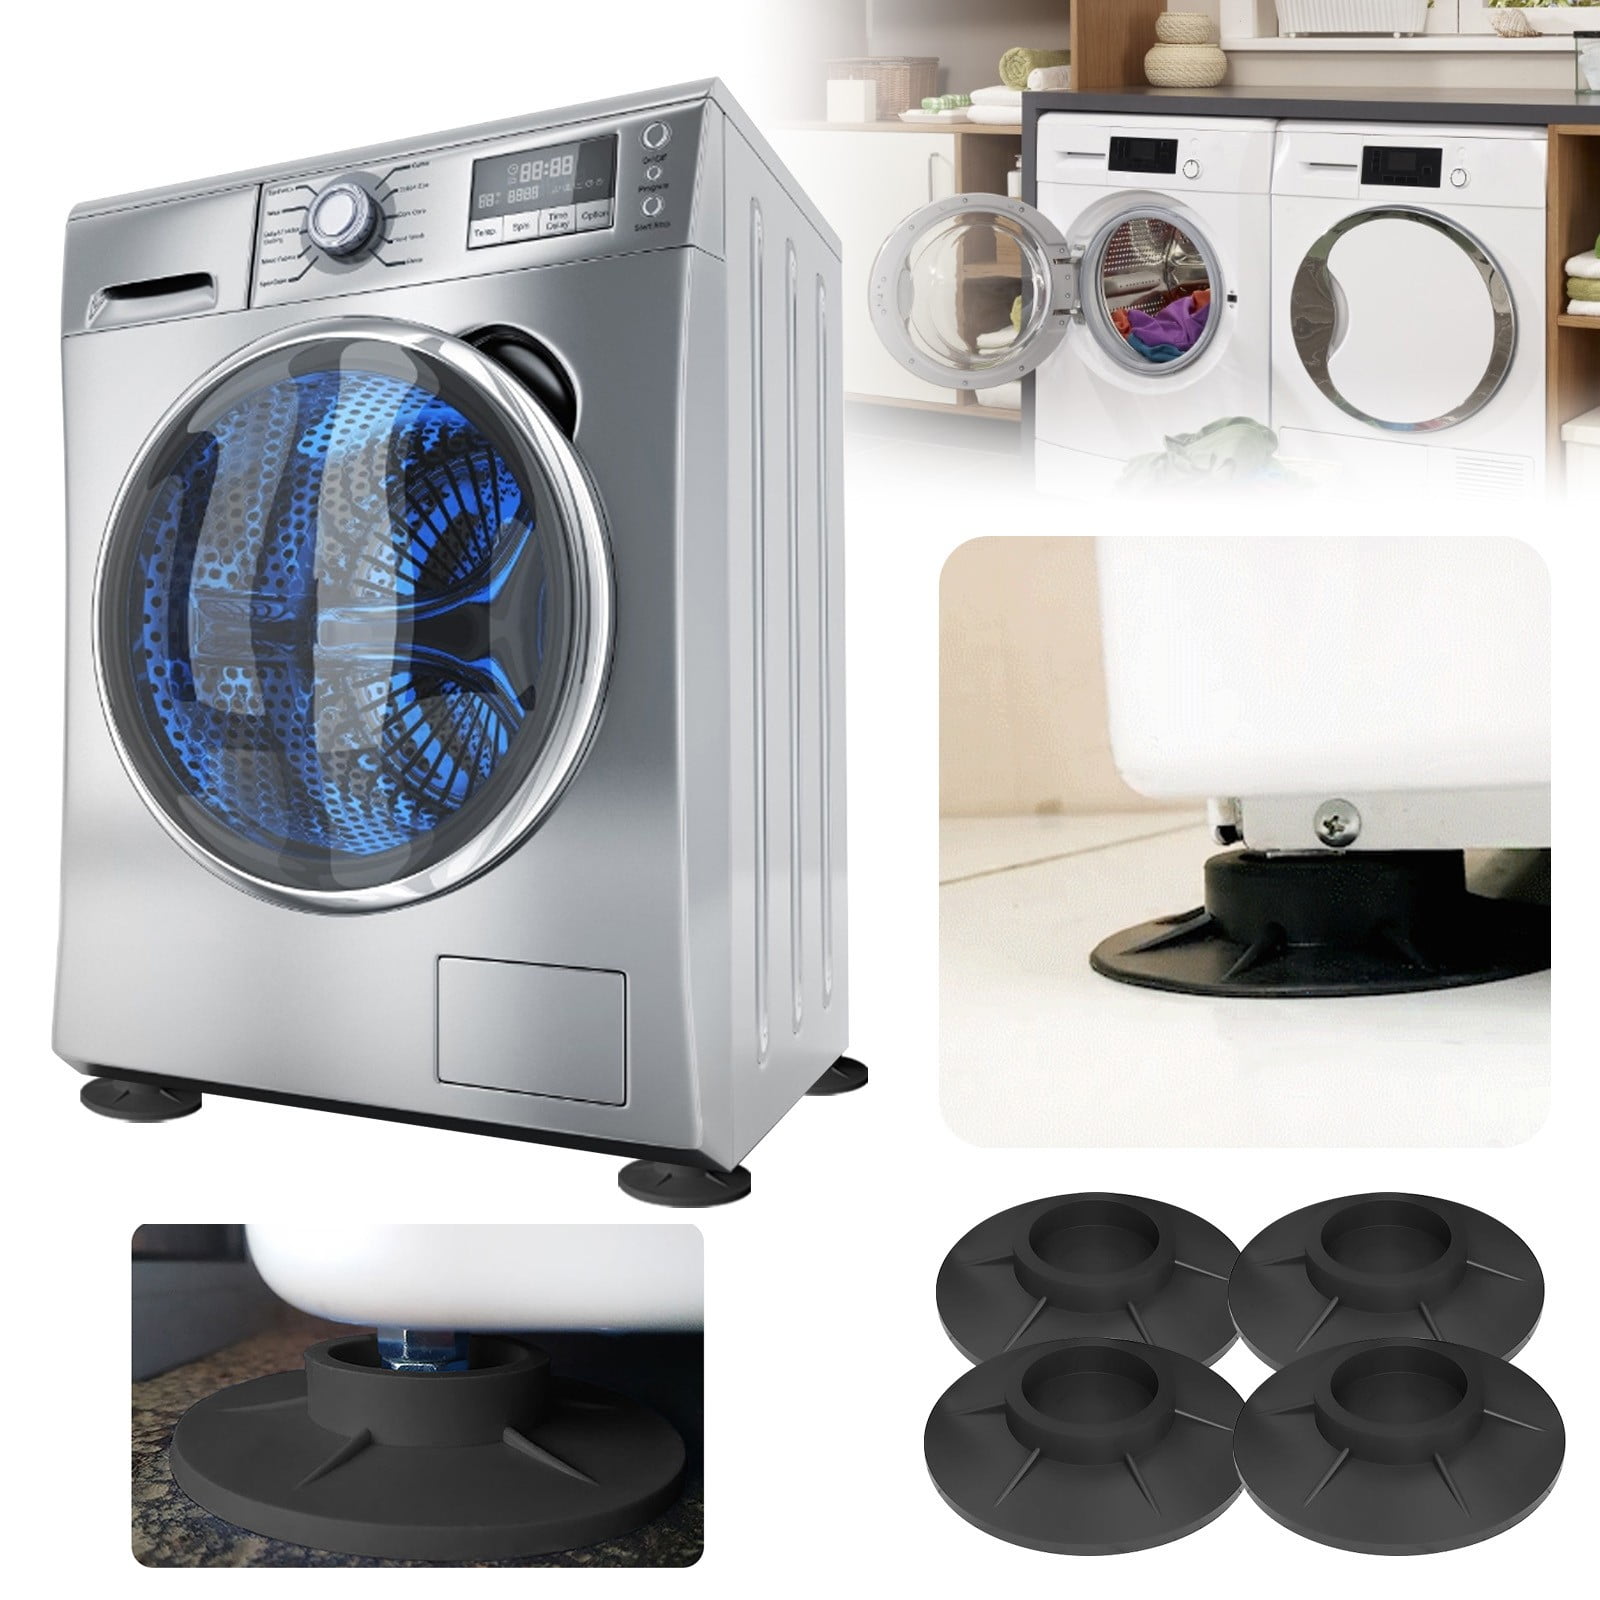 Details about   Washer/Dryer Cover,Fit for Outdoor Top Load and Front Load Machine,Waterproof Du 